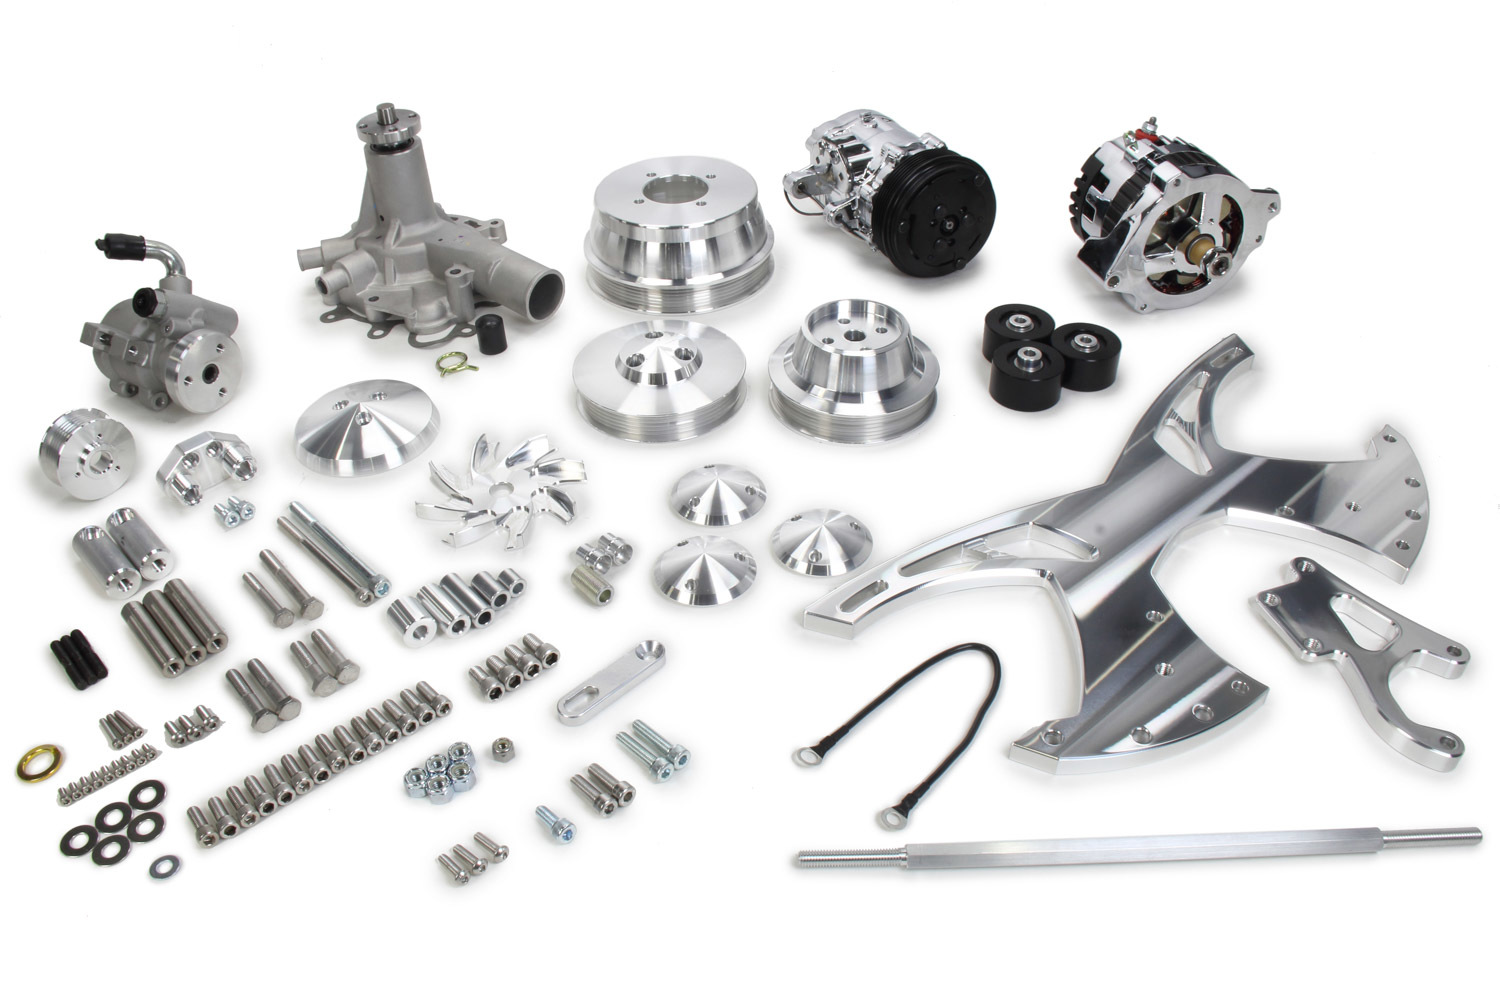 March Performance 16030 Pulley Kit, Style Track, 6-Rib Serpentine, Aluminum, Clear Powder Coat, Oldsmobile V8, Kit